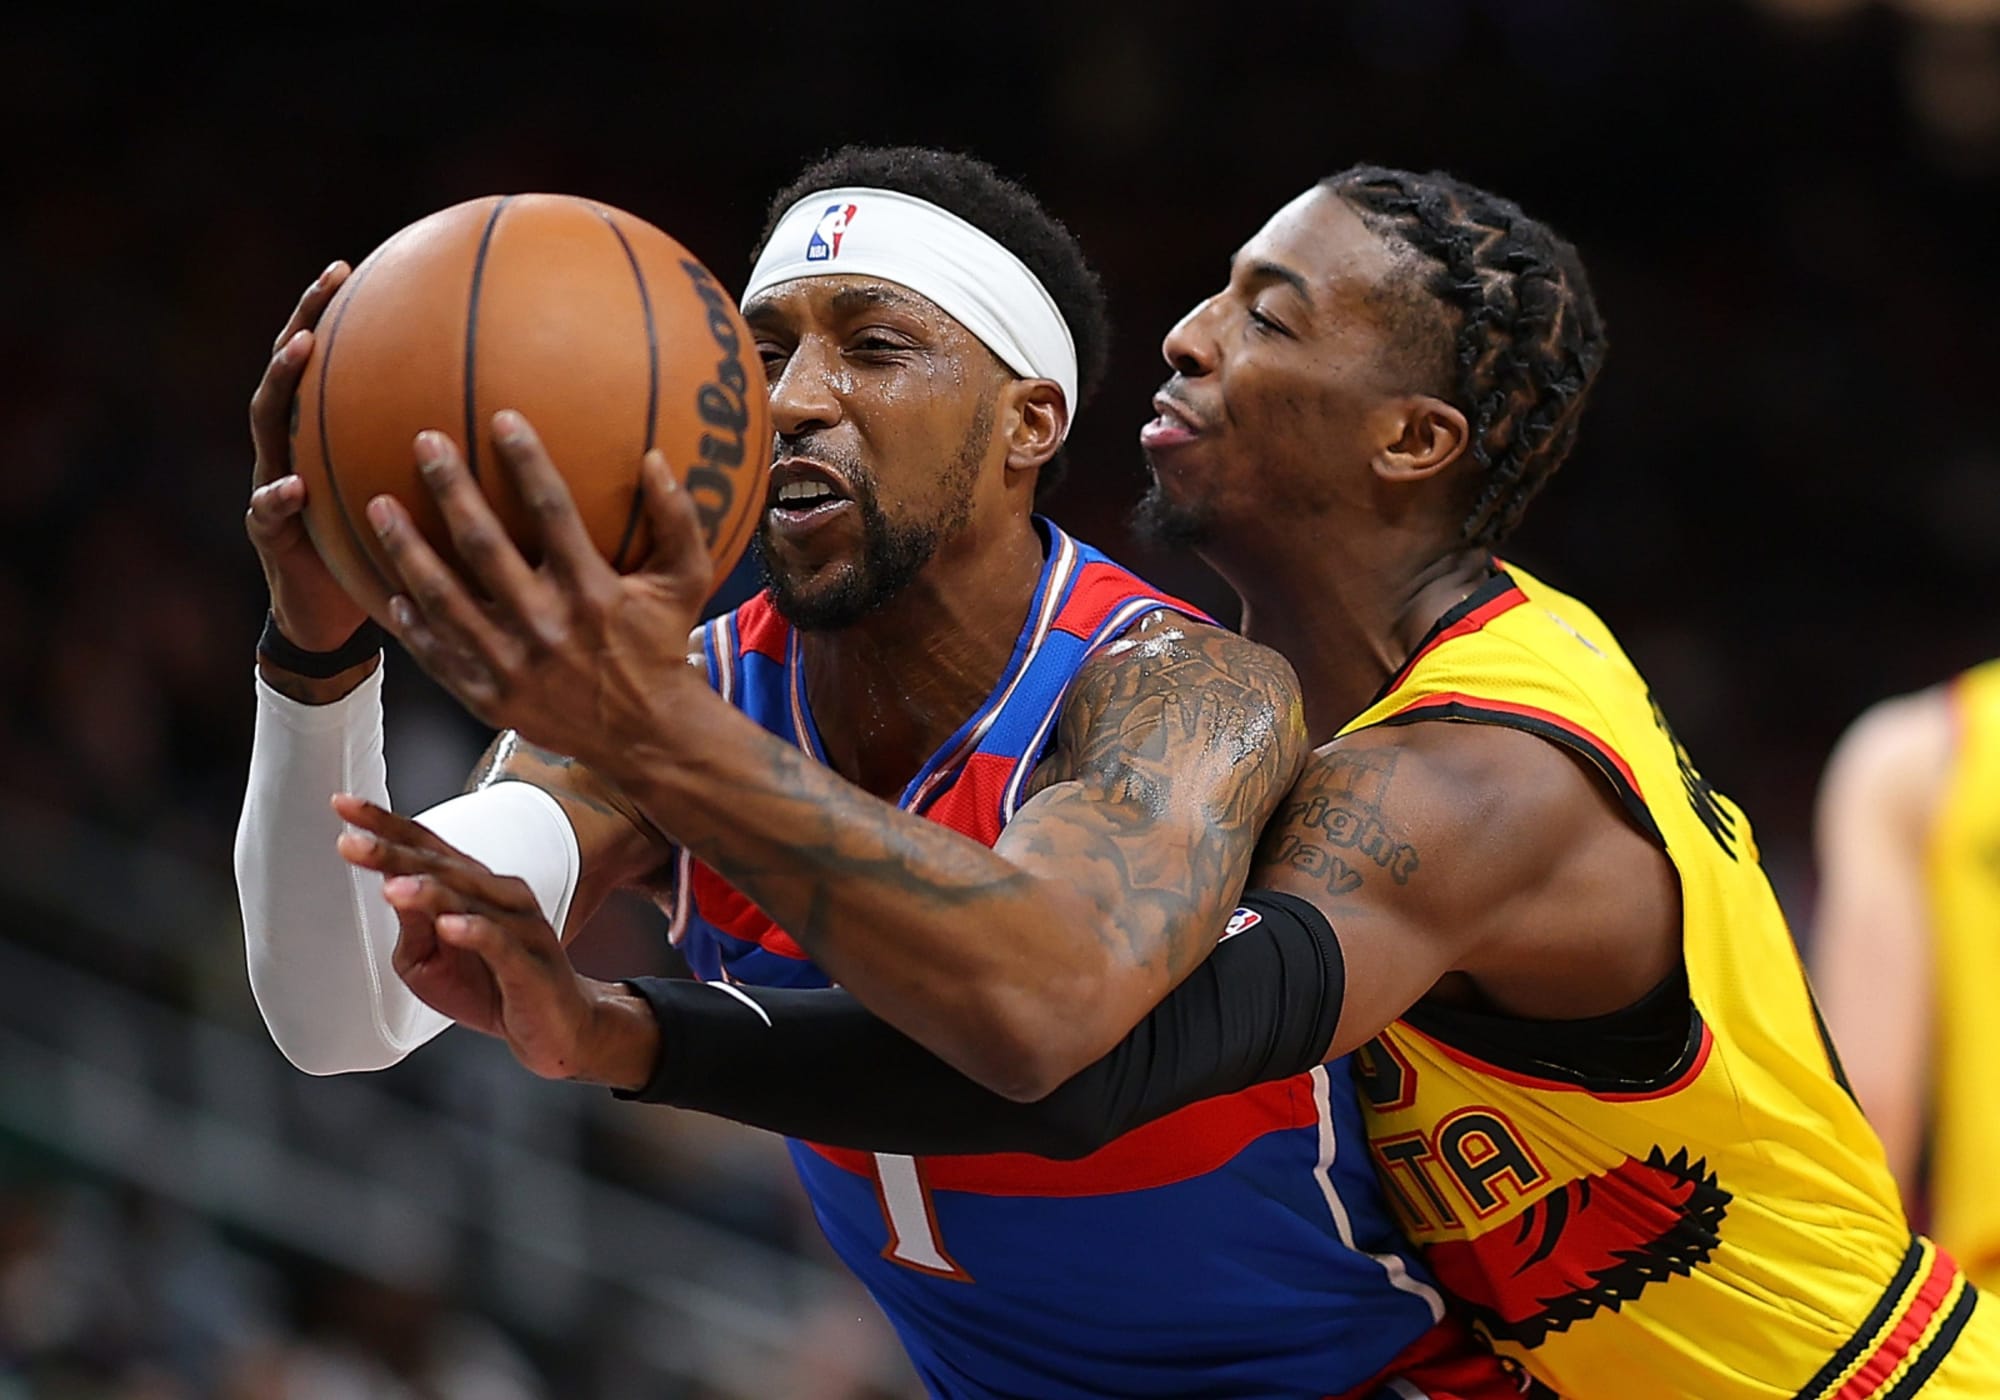 Kentavious Caldwell-Pope gets real on being a '3-and-D' guy